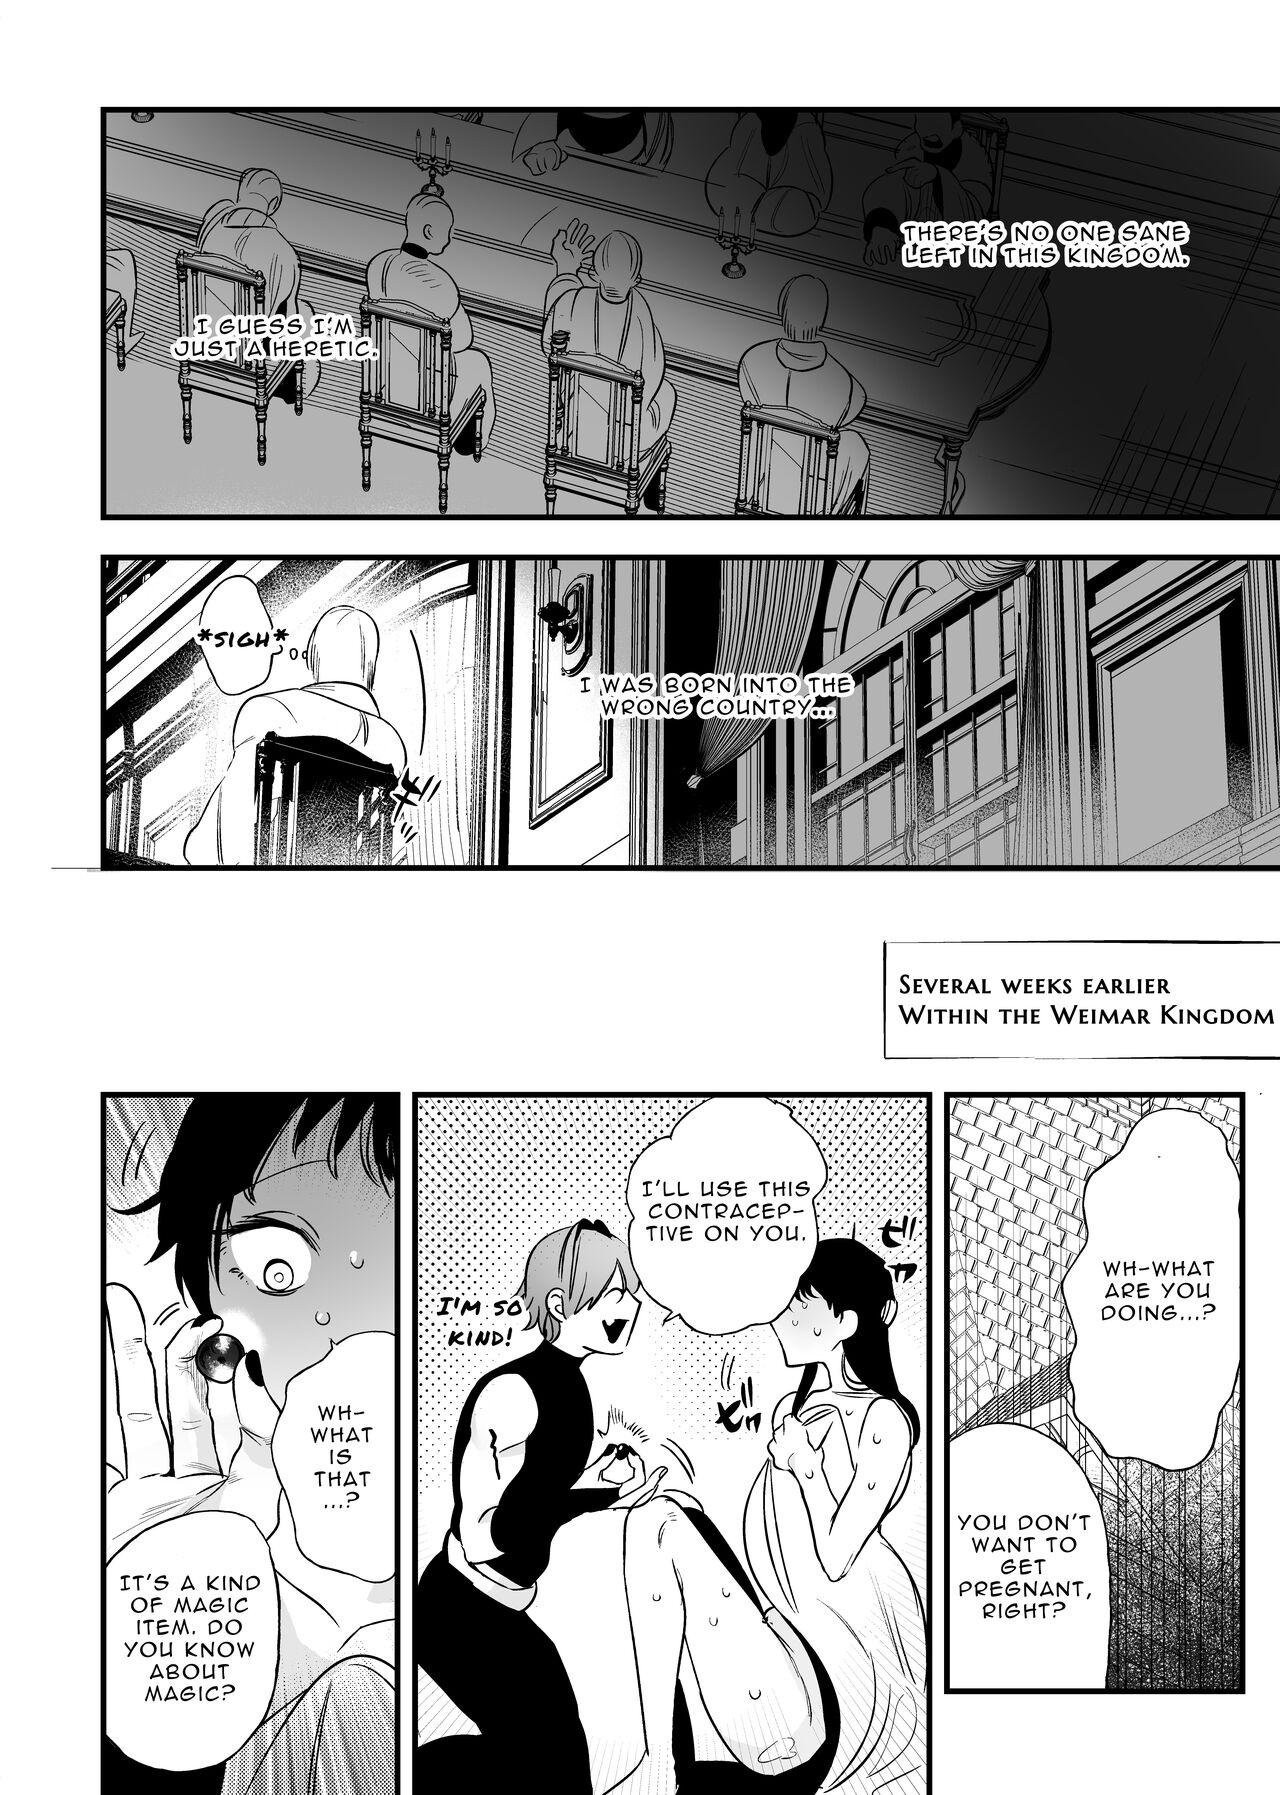 Joven The Man Who Saved Me on my Isekai Trip was a Killer... 2 - Original Small Tits - Page 8